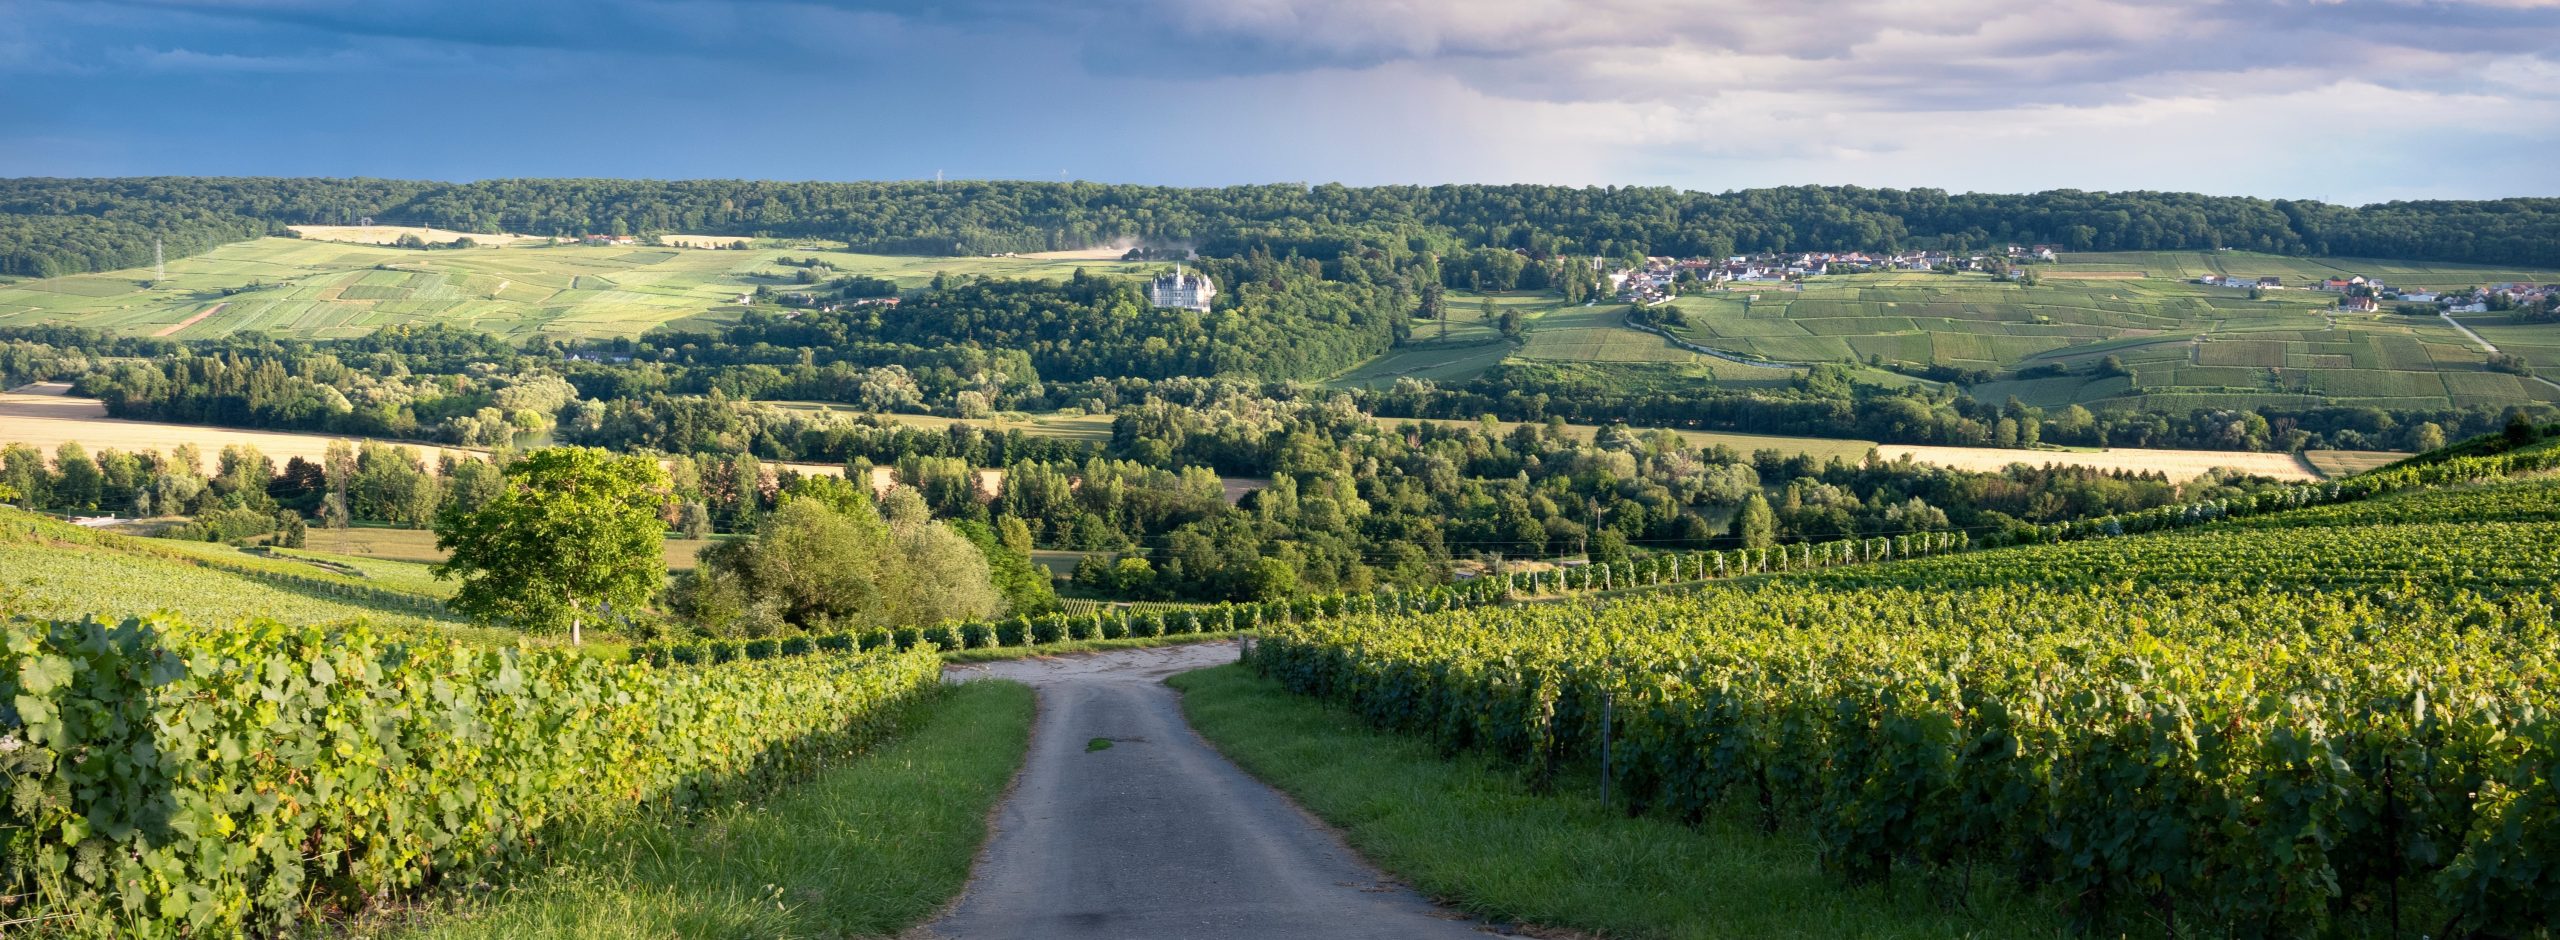 The ninth activity in the 10 best things to do in Belgium is hiking in the Ardennes